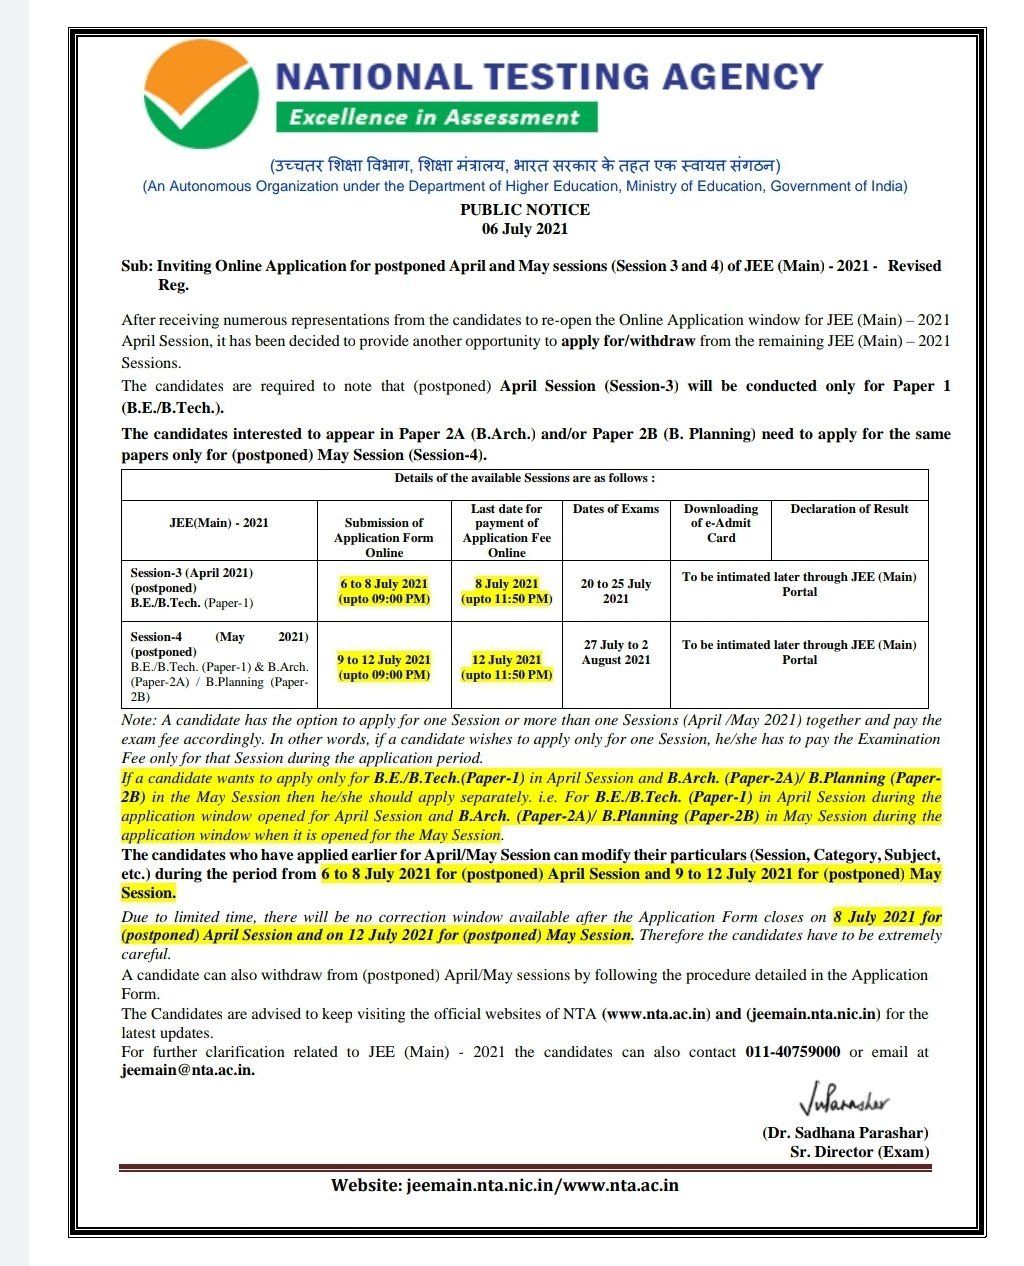 Nta Jee Main 2021 Nta Releases Application Forms At Jeemain Nta Nic In Allows Change In Exam Centres India Com